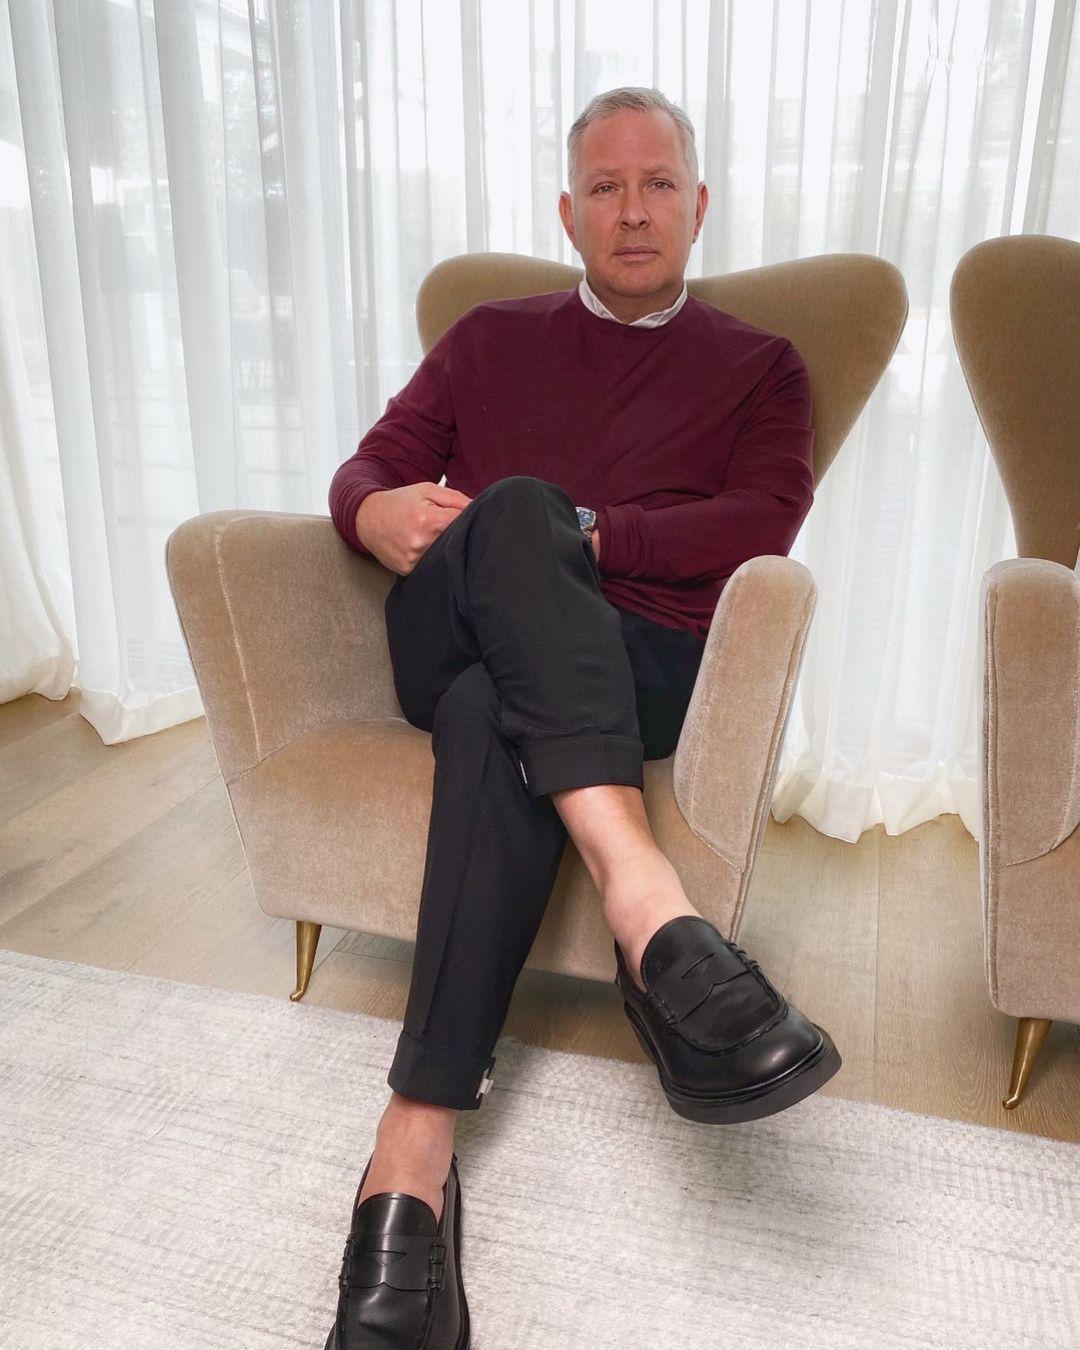 A photo of PK Kemsley in a red sweater and black pant, sitting on a couch.